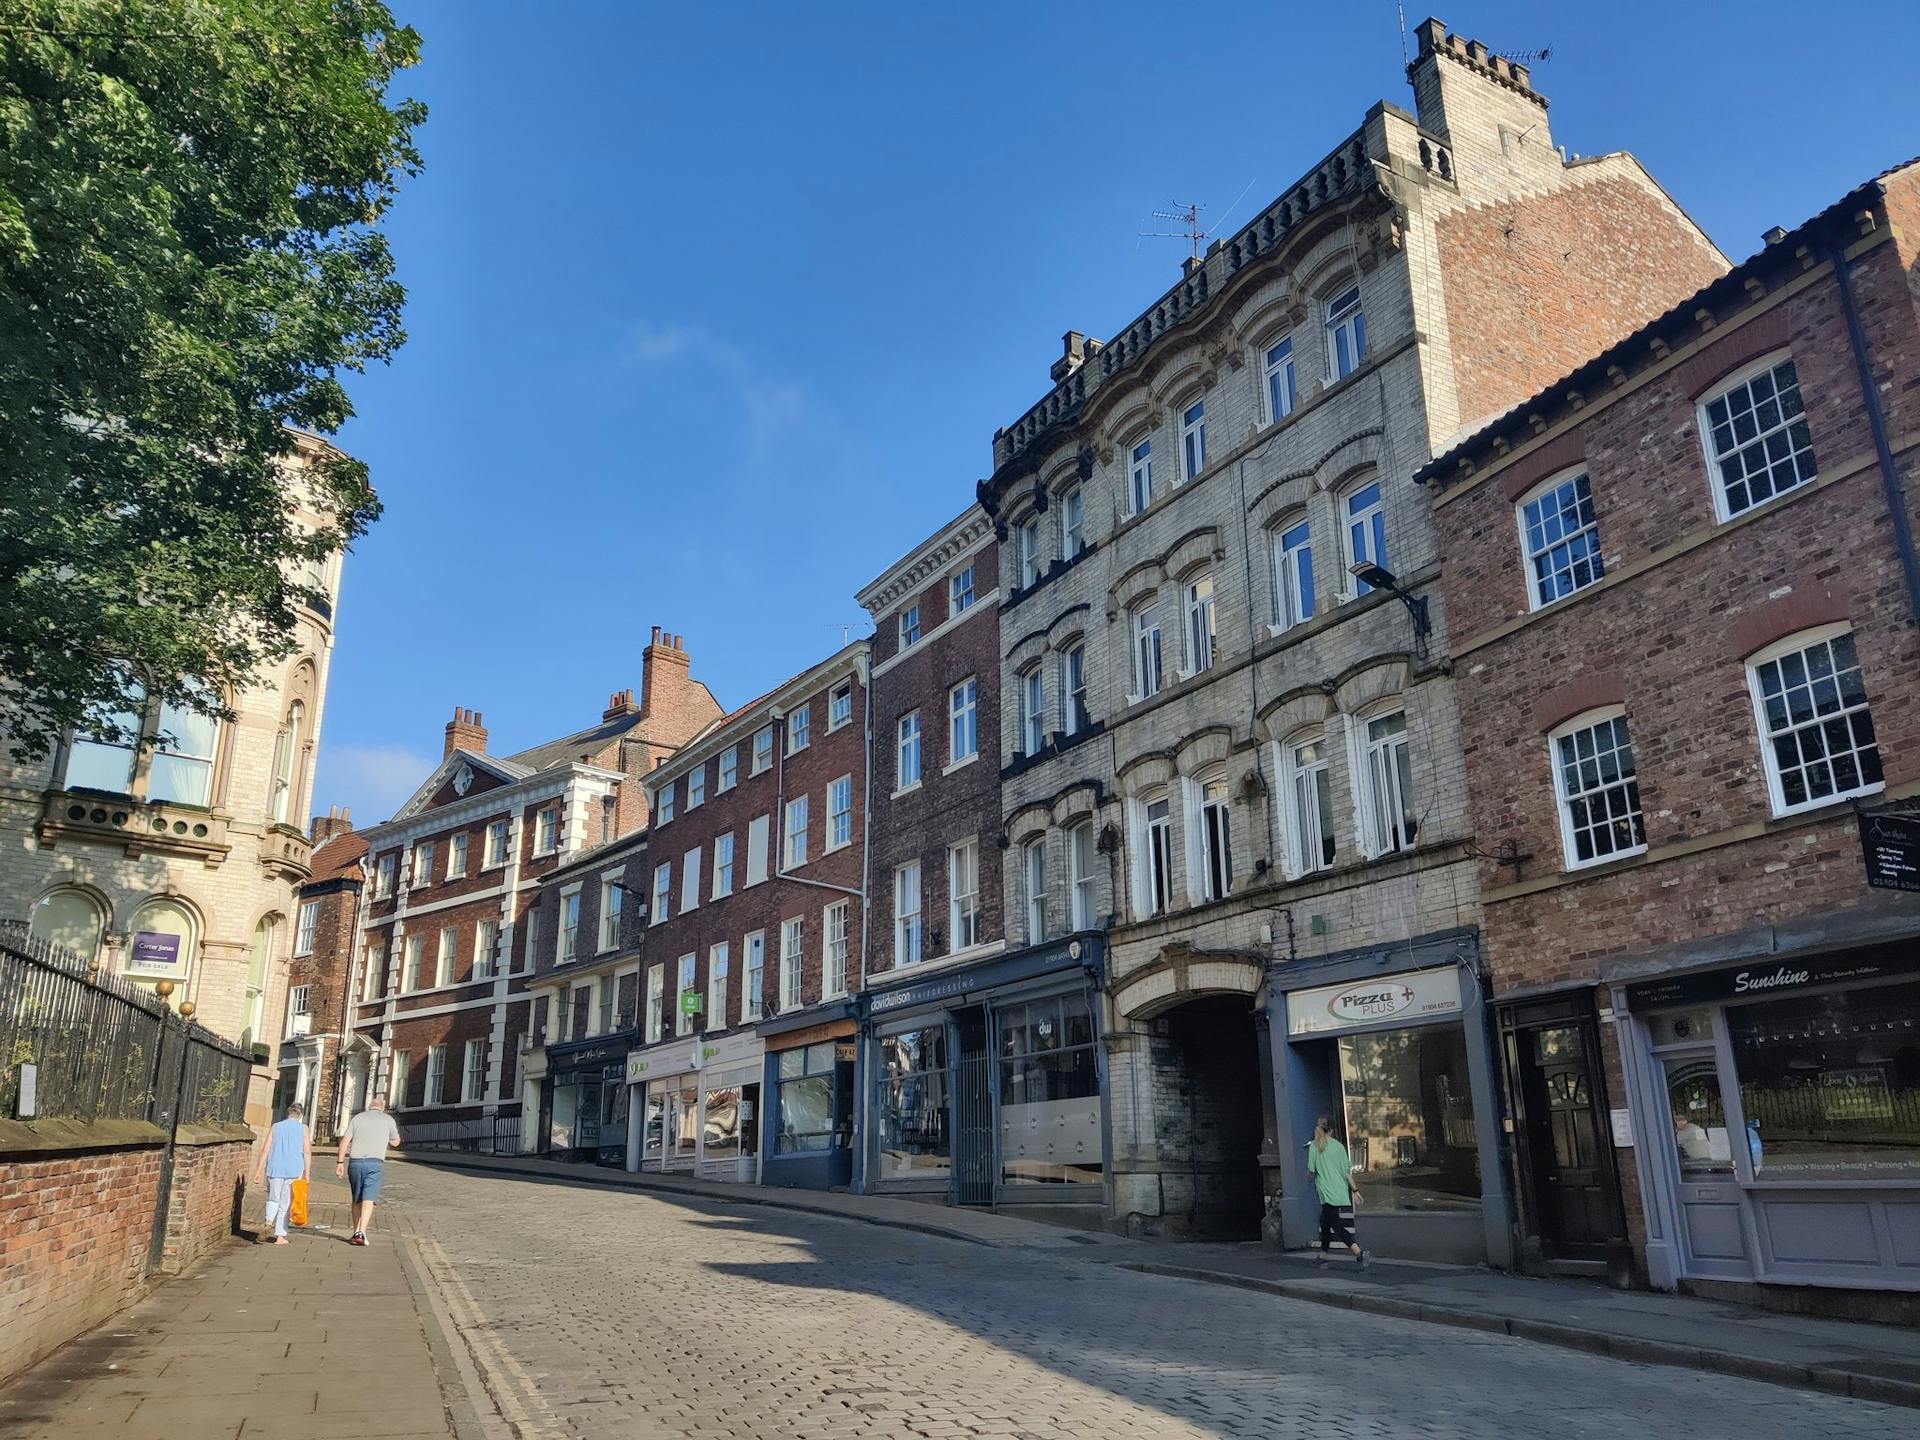 <p>Micklegate is a historic street in the city of York, England. It means <em>Great Street</em> in Old Norse, and was the main entrance to the city from the south.</p><p><br></p><p><u>Micklegate has been the site of many important events and buildings, such as</u></p><p><br></p><p>Micklegate Bar, the most important of York’s four medieval gateways, and the focus for grand events. It was the royal entrance to the city, and the place where the severed heads of rebels and traitors were displayed. The lower section of the bar dates from the 12th century, and the top two storeys from the 14th.</p><p><br></p><p>Holy Trinity Church, a parish church of the Church of England, dating from the 12th century. It has a Norman nave, a 15th-century tower, and a 17th-century chancel. It also contains some medieval stained glass and monuments.</p><p><br></p><p>The Priory of the Holy Trinity, a Benedictine monastery founded in the 11th century, and dissolved in the 16th century. It was located on the south side of Micklegate, and its remains can still be seen in Priory Street.</p><p><br></p><p>The Bar Convent, the oldest surviving Roman Catholic convent in England, founded in 1686. It is now a museum, a guest house, and a conference centre. It has a 19th-century Gothic chapel, a library, and a collection of religious artefacts.</p><p><br></p><p>The Micklegate Run, a traditional soapbox race held every August bank holiday since 1964. It involves teams of amateur racers competing in homemade carts down the steep slope of Micklegate. It attracts thousands of spectators and raises money for charity.</p><p><br></p><p>Micklegate is also known for its Georgian architecture, its views of the river Ouse, and its lively nightlife. It has many pubs, restaurants, and clubs, and is popular with locals and tourists alike</p><p>Micklegate is one of the most handsome and rewarding streets in York, and has a rich and varied history.</p>